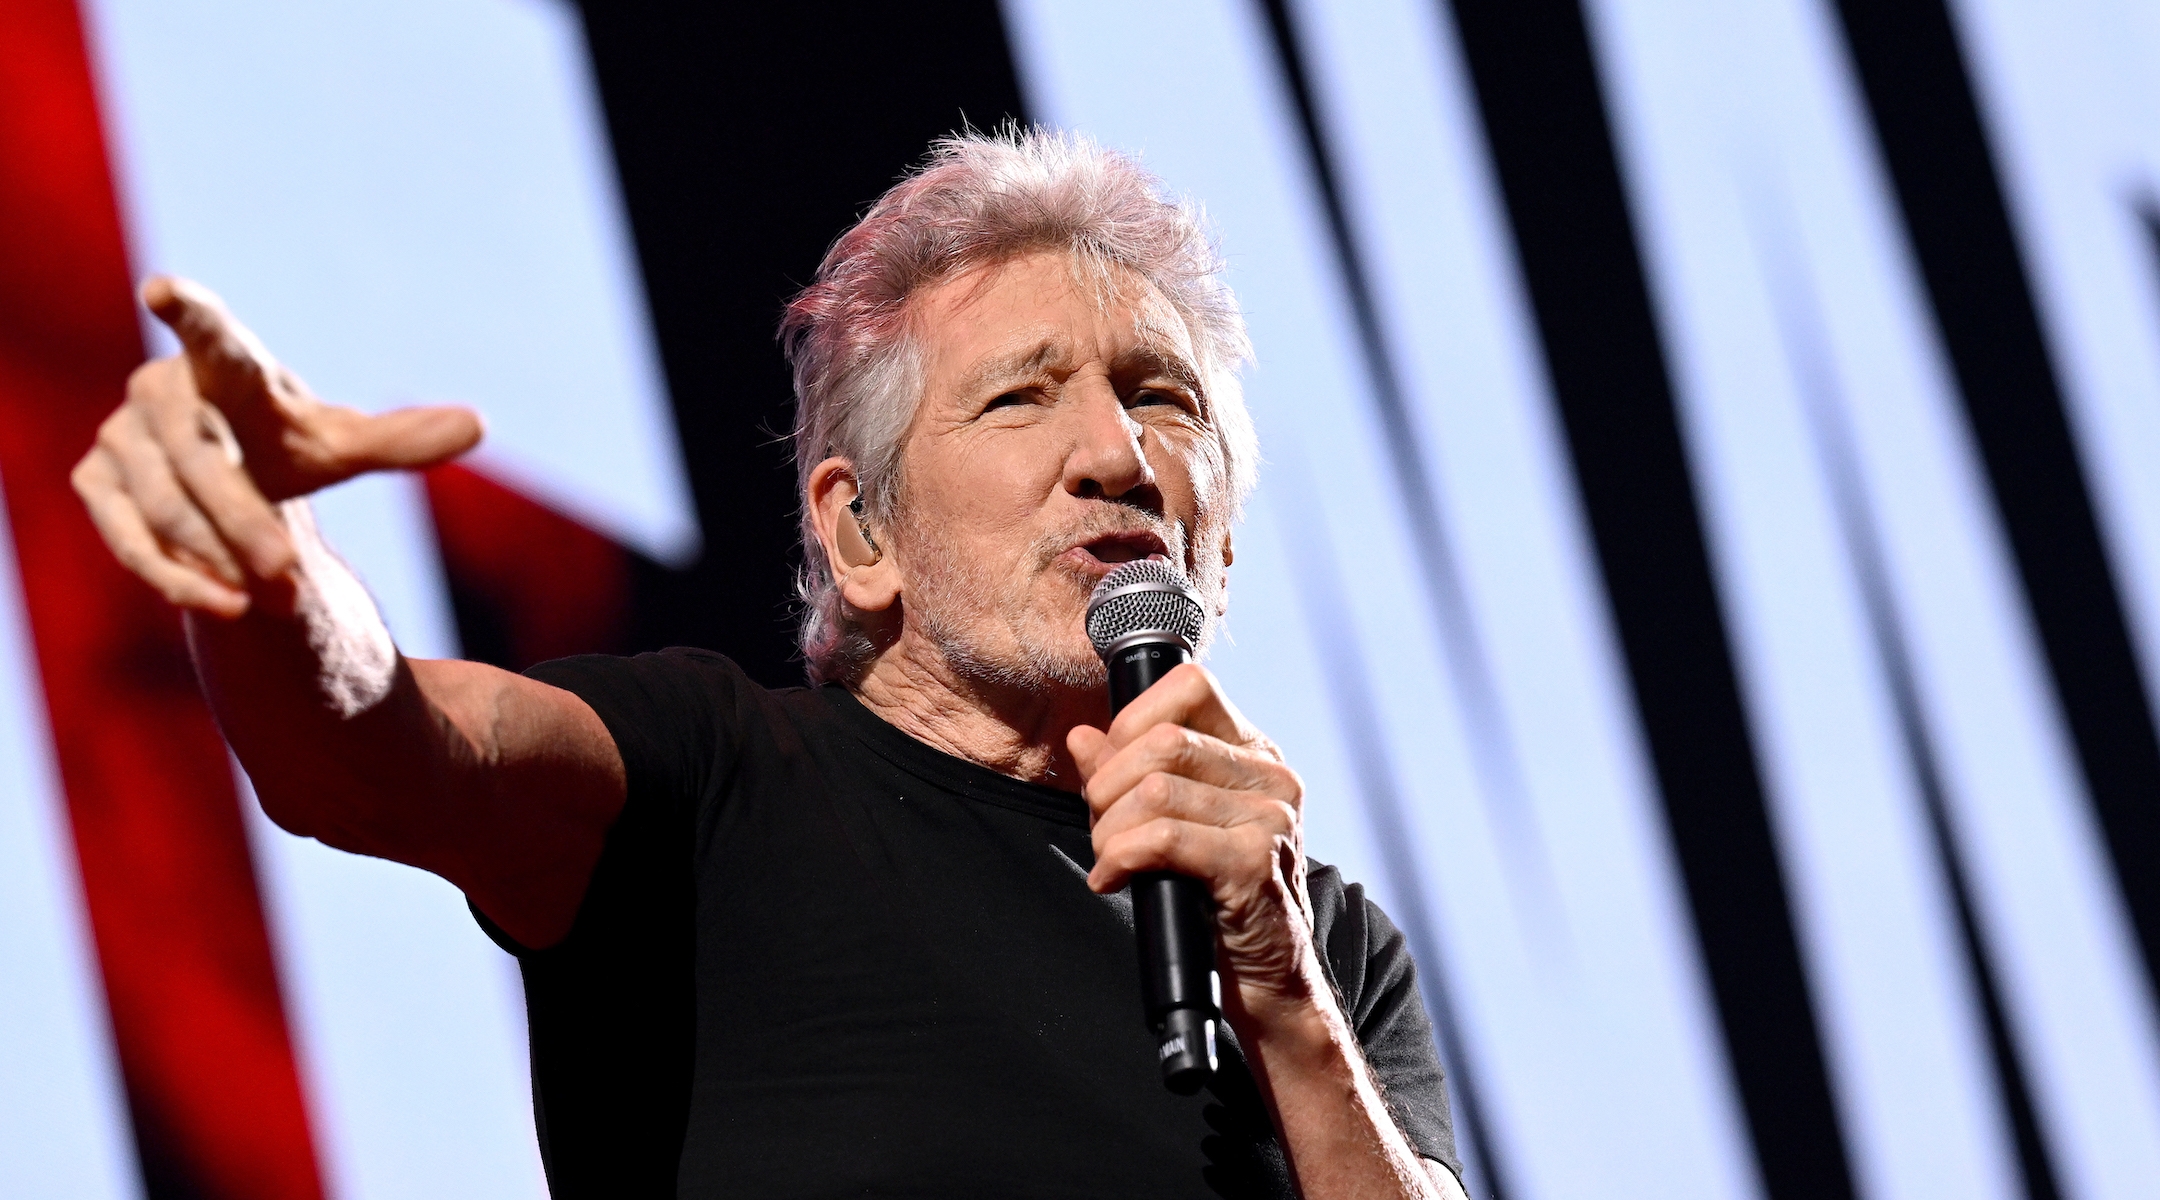 Roger Waters uses Anne Frank’s name at German concerts, prompting calls for punishment from Jewish groups